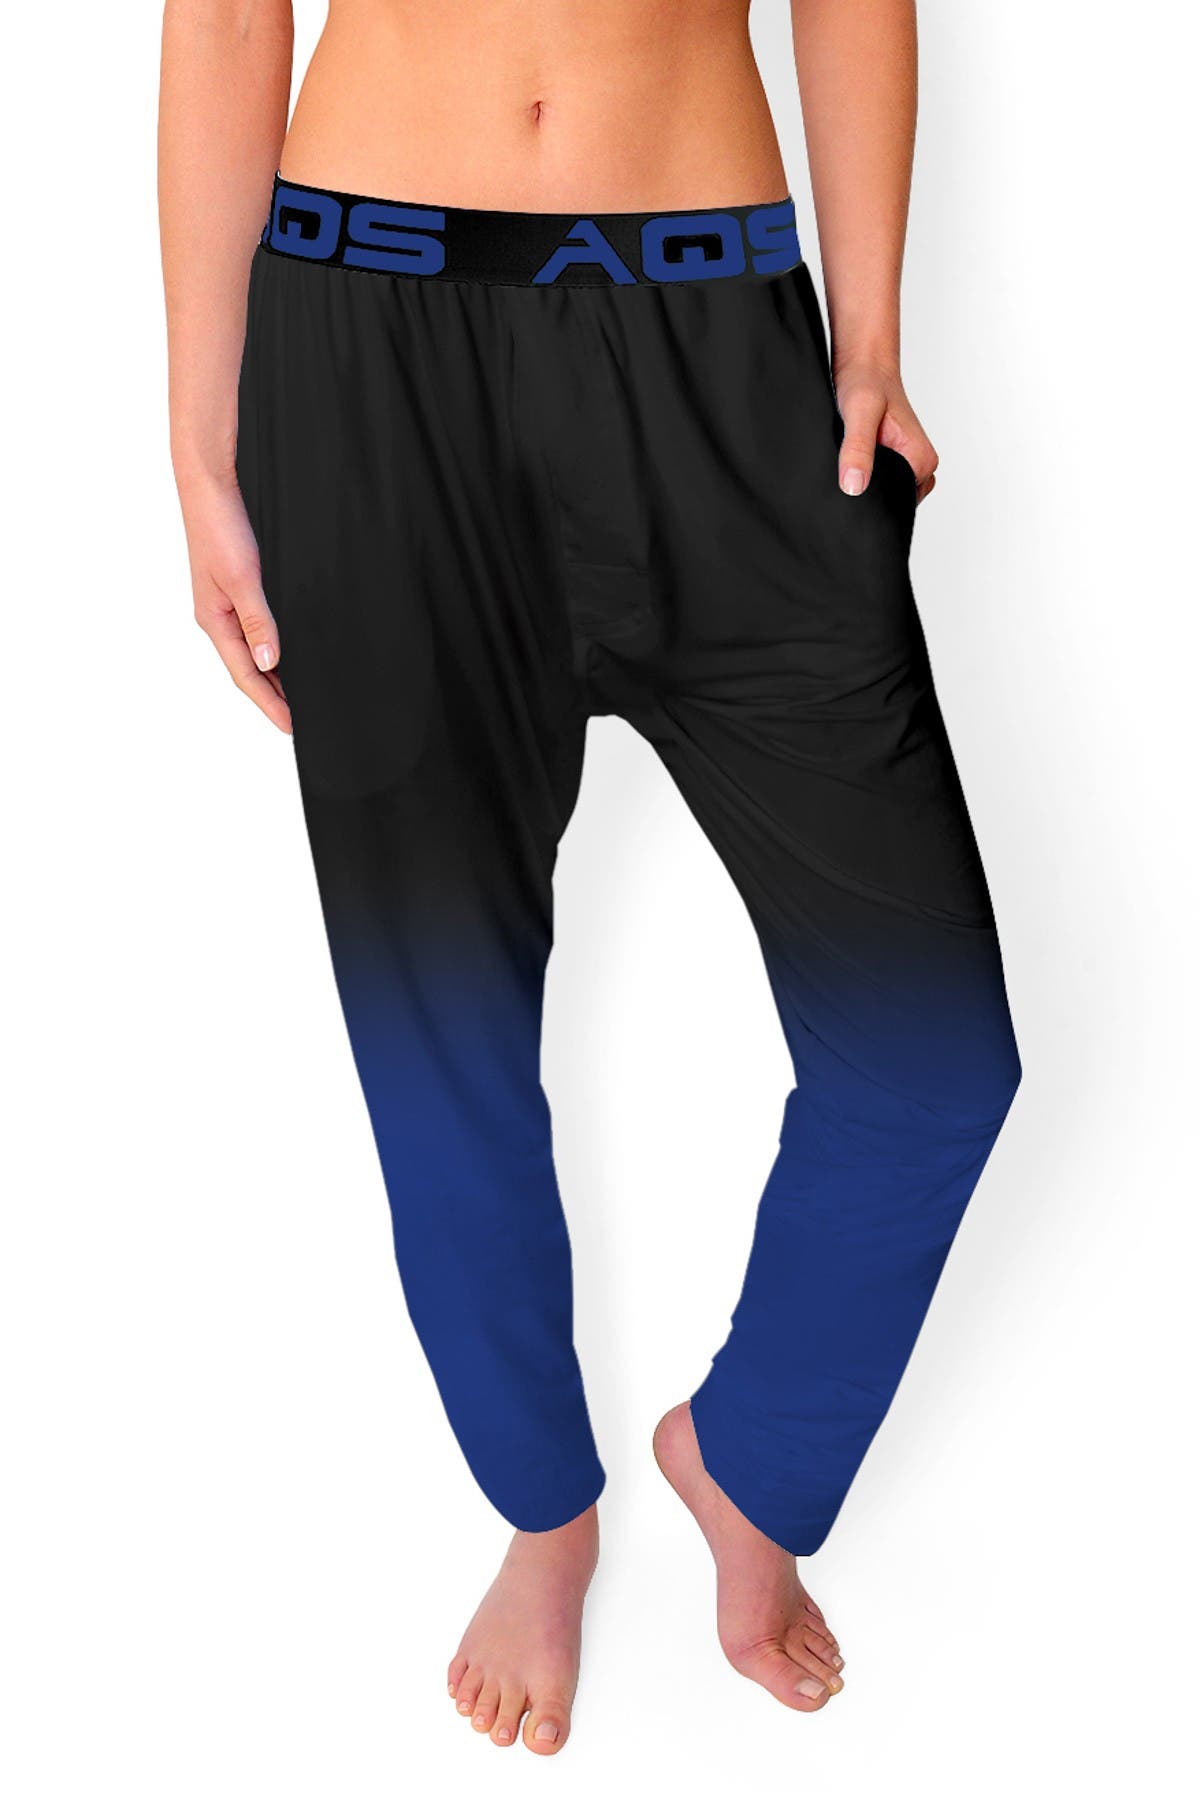 Aqs Ombre Lounge Pants In Black/dark Blue Ombre